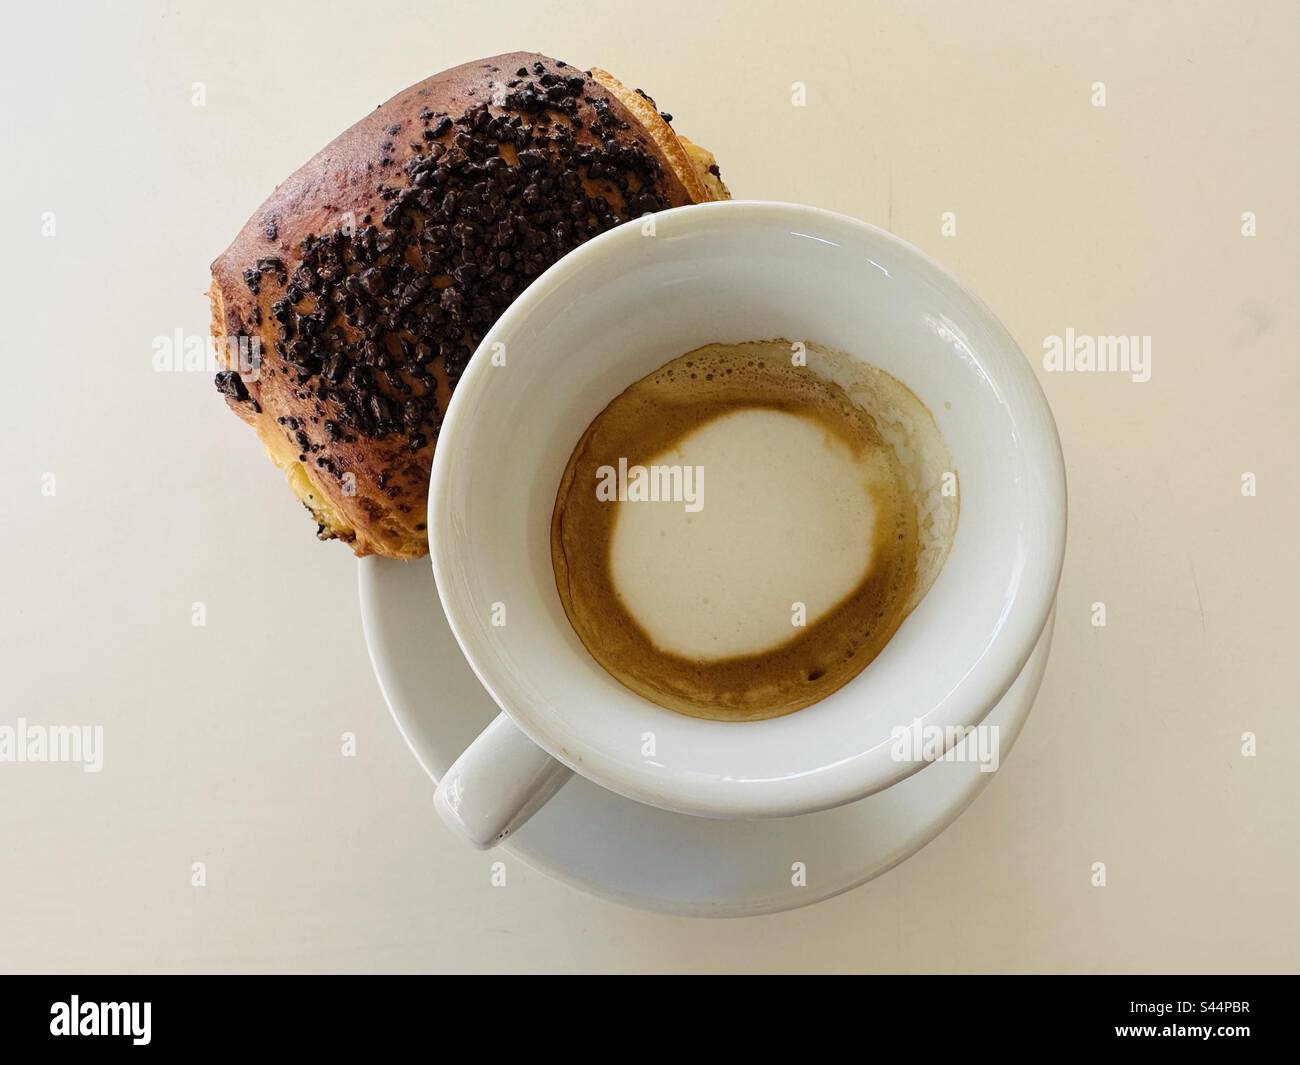 Breakfast time with espresso coffee and milk with a chocolate pastry Stock Photo